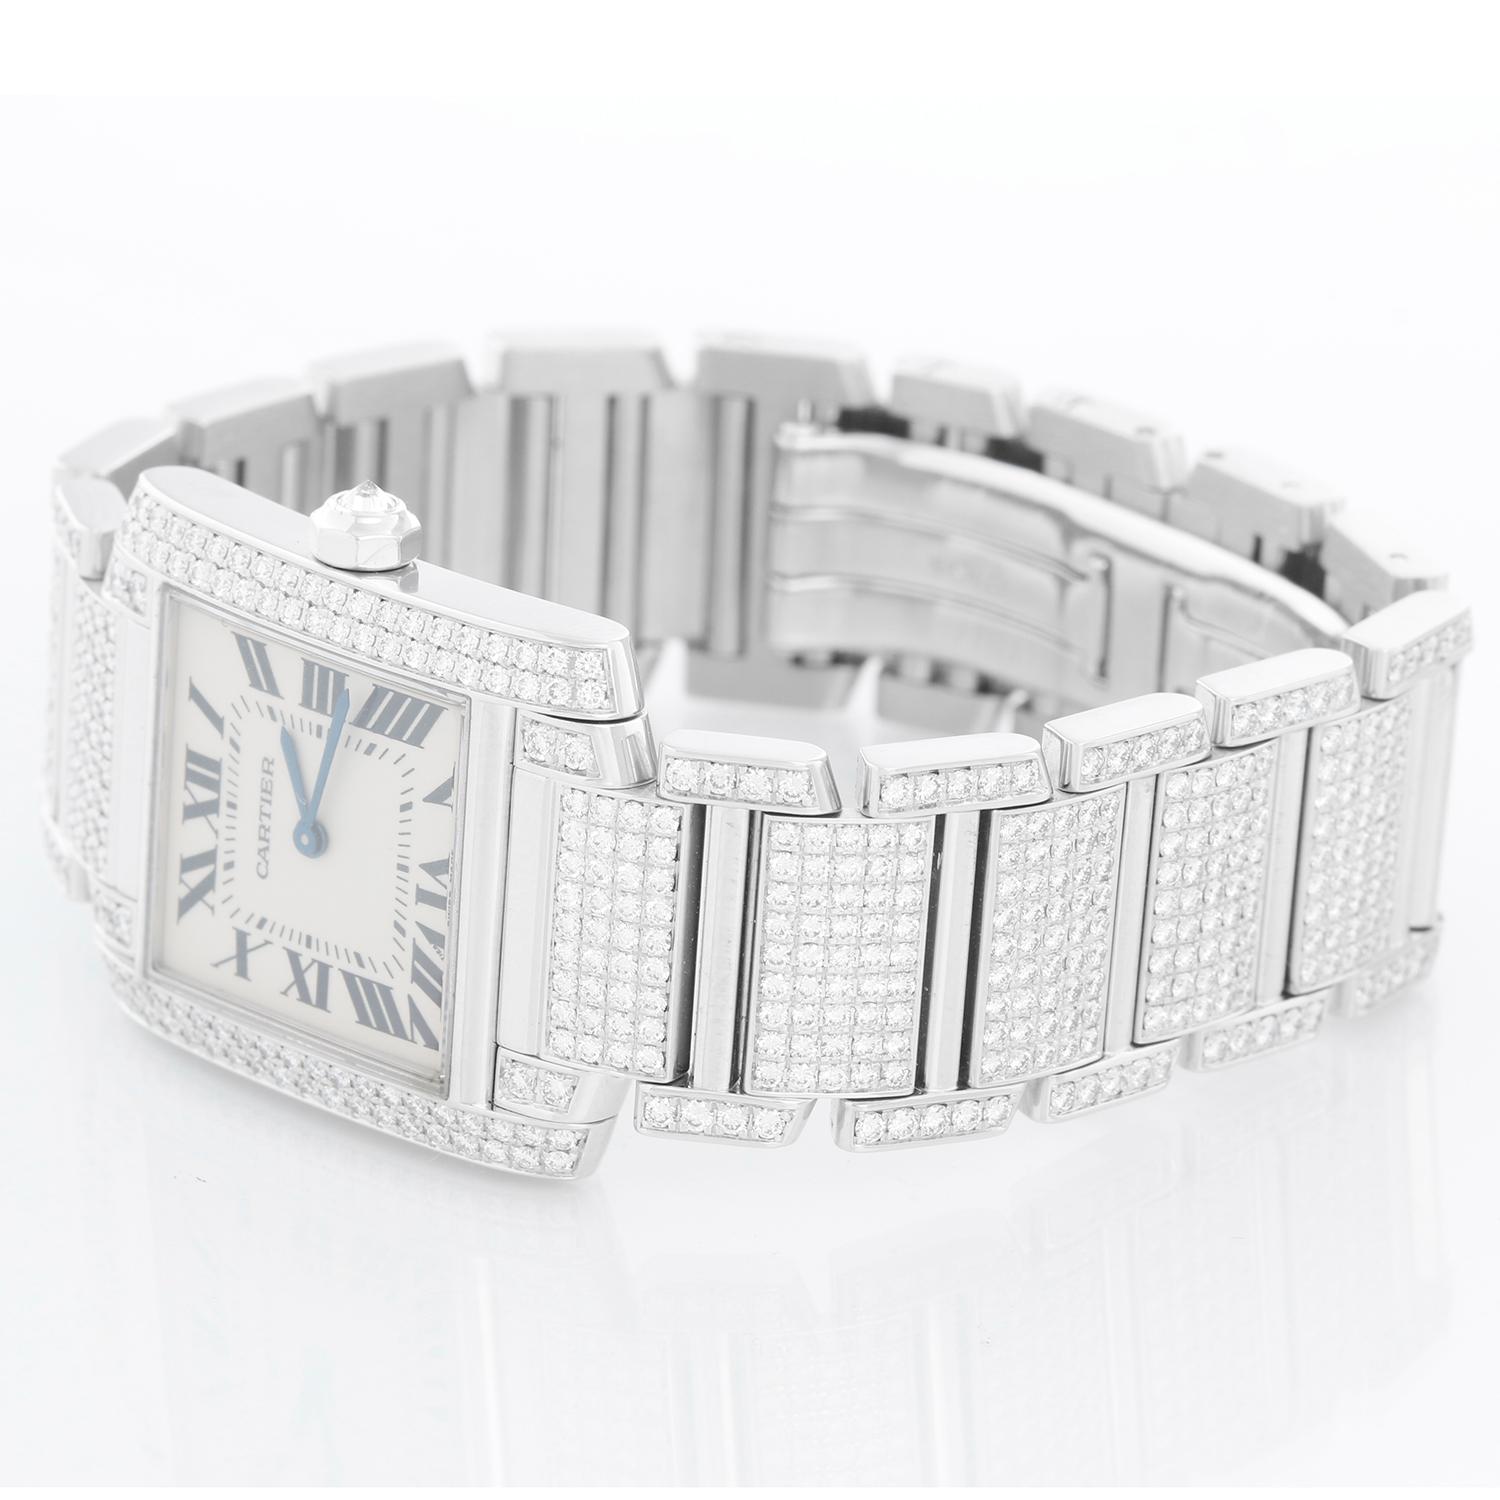 Cartier Pave Diamond Tank Francaise 18k White Gold Midsize Watch WE1009SD - Quartz. 18k white gold case with pave diamond bezel ( 25 x 30 mm ) . Silvered with black Roman numerals. 18k white gold and pave diamond bracelet (will fit apx. 6-1/4-in.